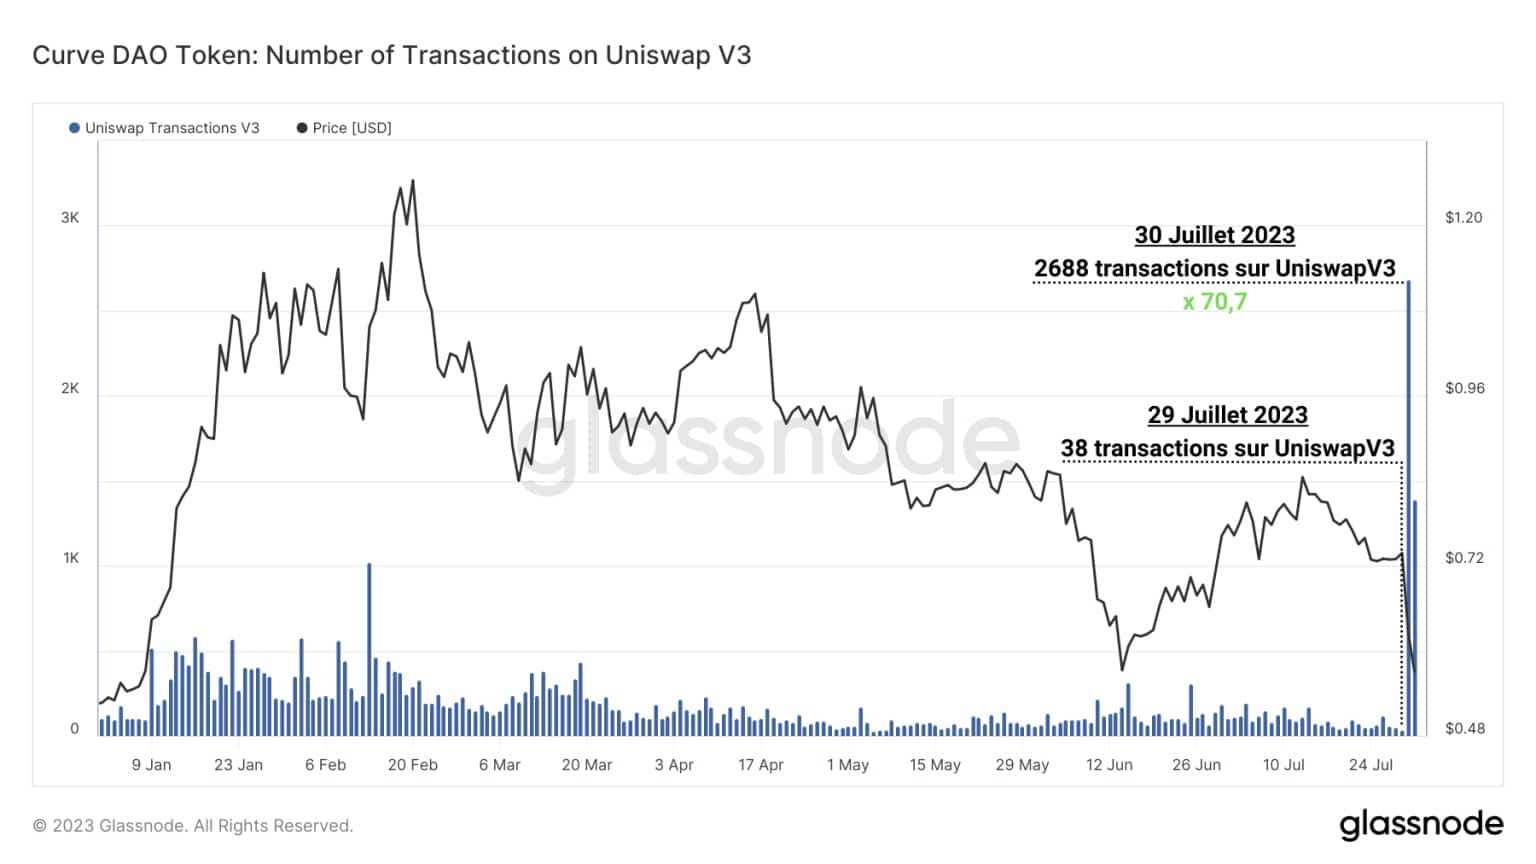 Figure 3: Number of transactions on UniswapV3